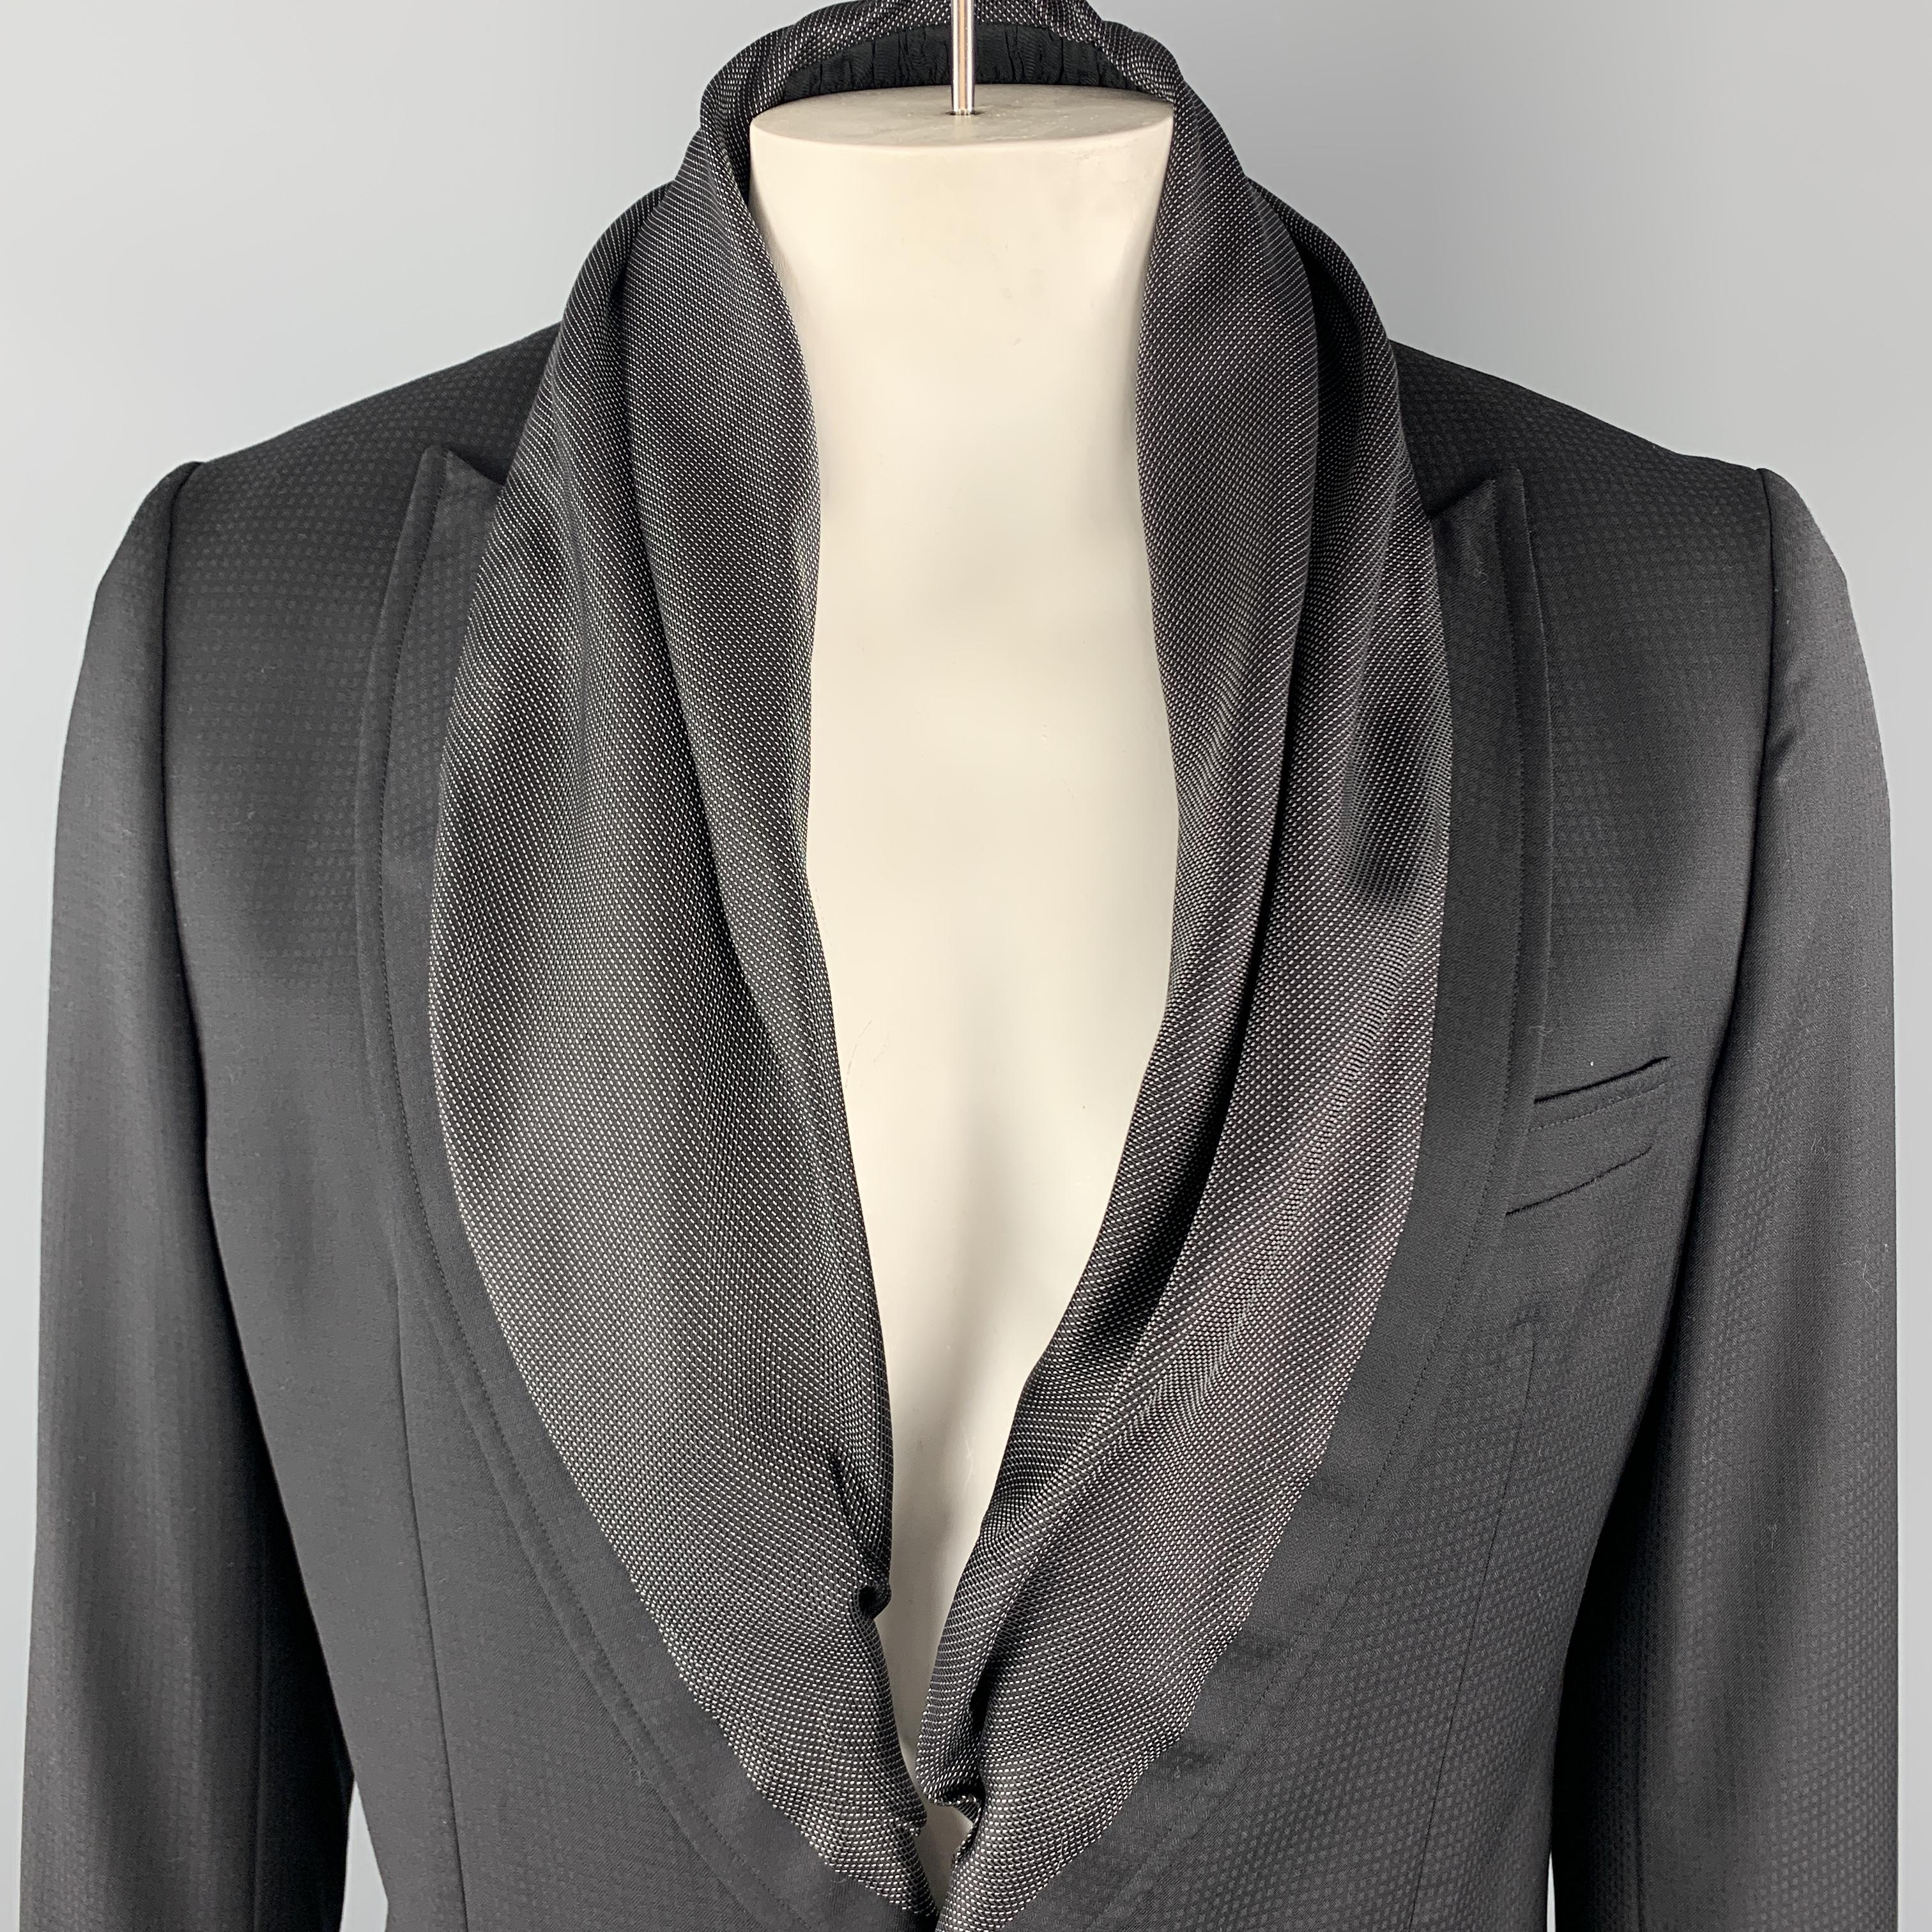 JOHN GALLIANO Tuxedo Sport Coat comes in a black on black checkered wool material, with a grey scarf collar, a draped detail at inner collar, slit pockets, a single button at closure, single breasted, buttoned cuffs and a single vent at back. Made